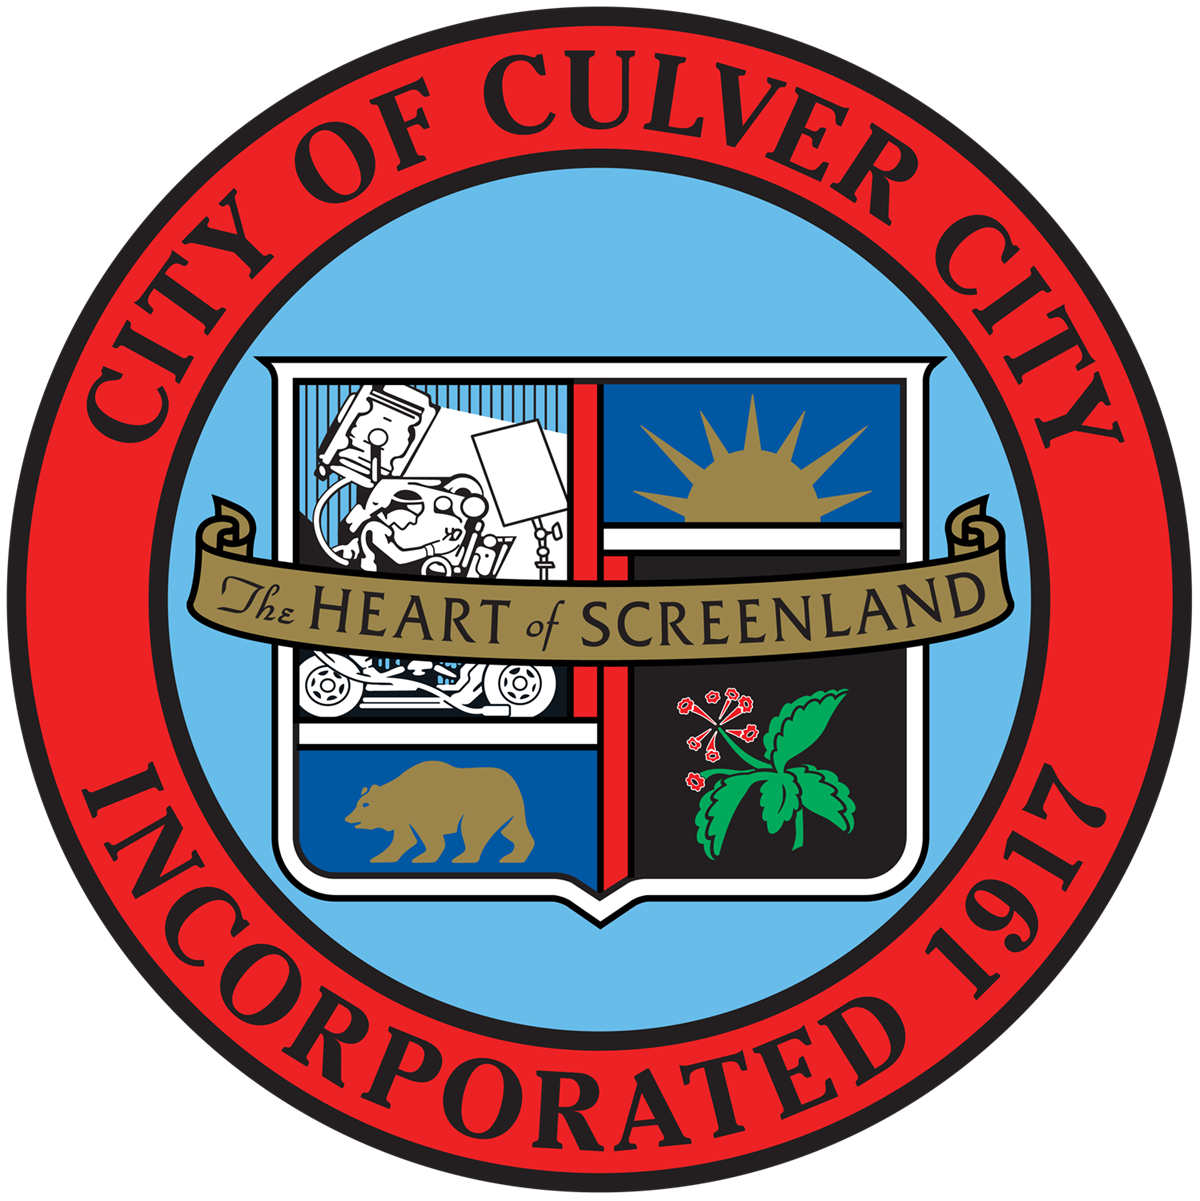 City Council Authorizes a Temporary Sidewalk Widening City of Culver City